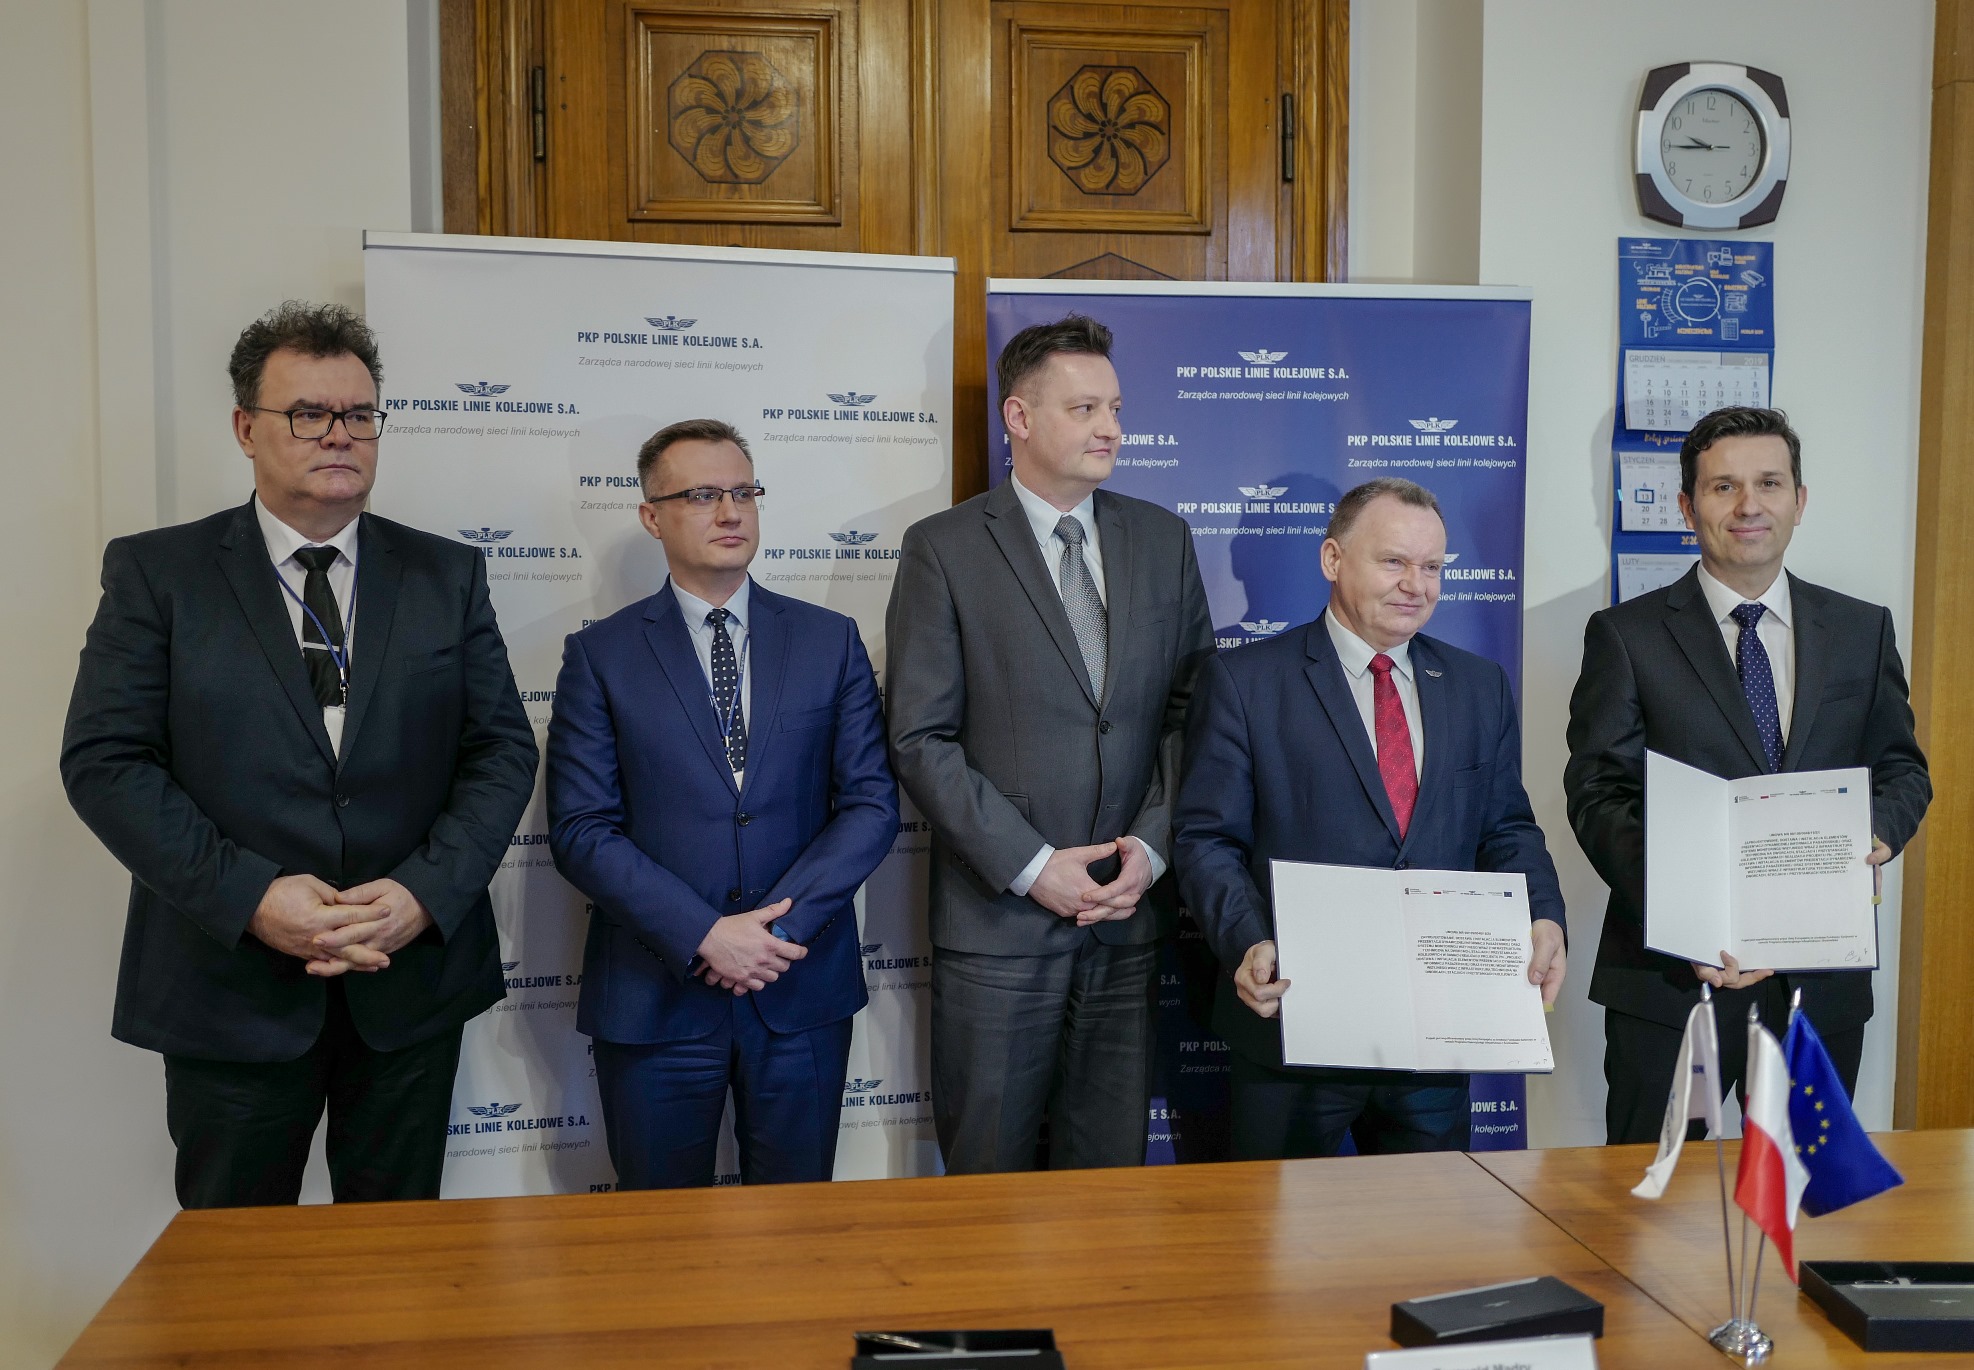 Aldesa - Aldesa has signed a PLN 181 million contract for the installation of the passenger information system